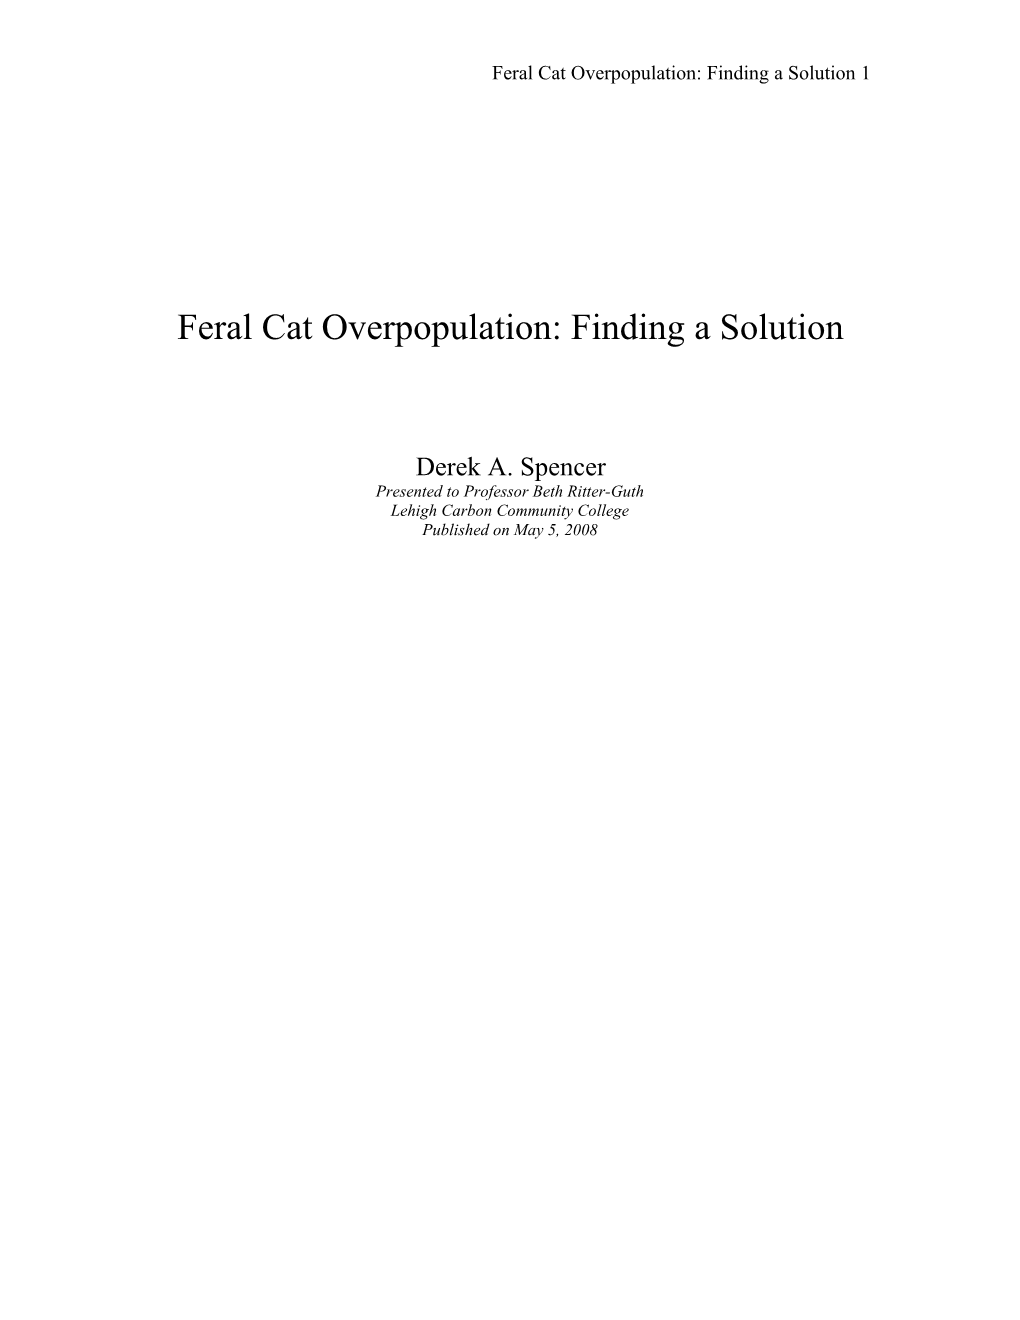 Feral Cat Overpopulation: Finding a Solution